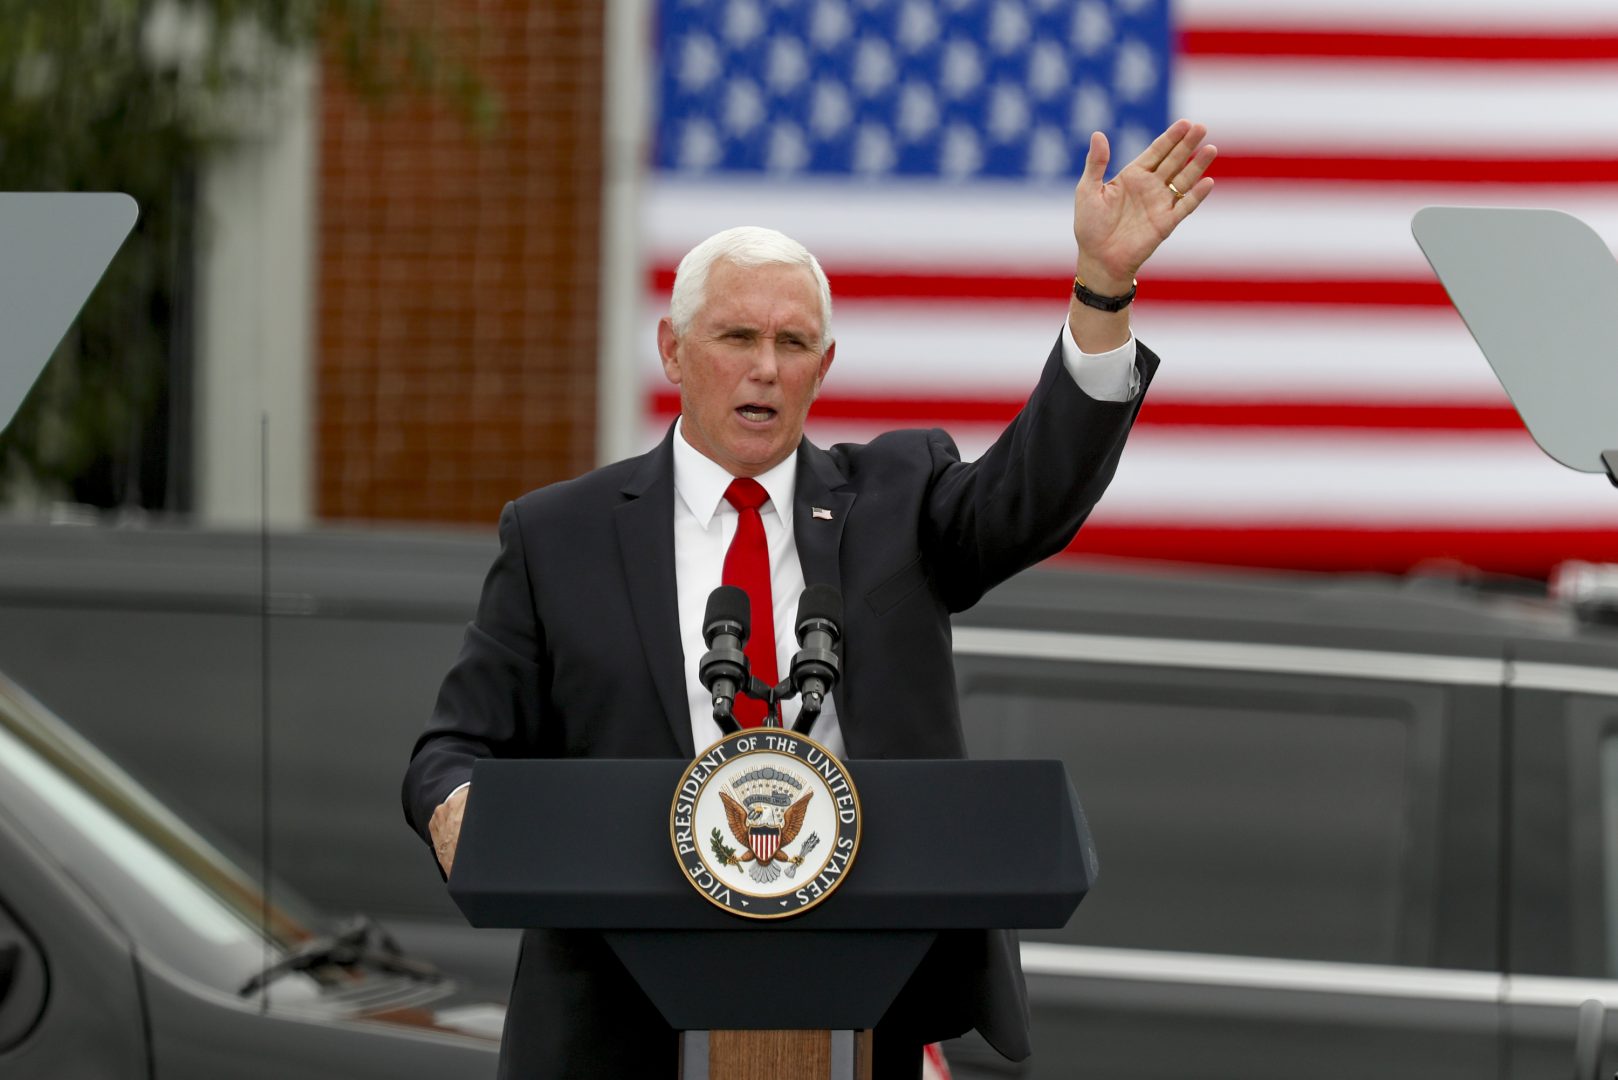 Vice President Mike Pence waves after he spoke at a 